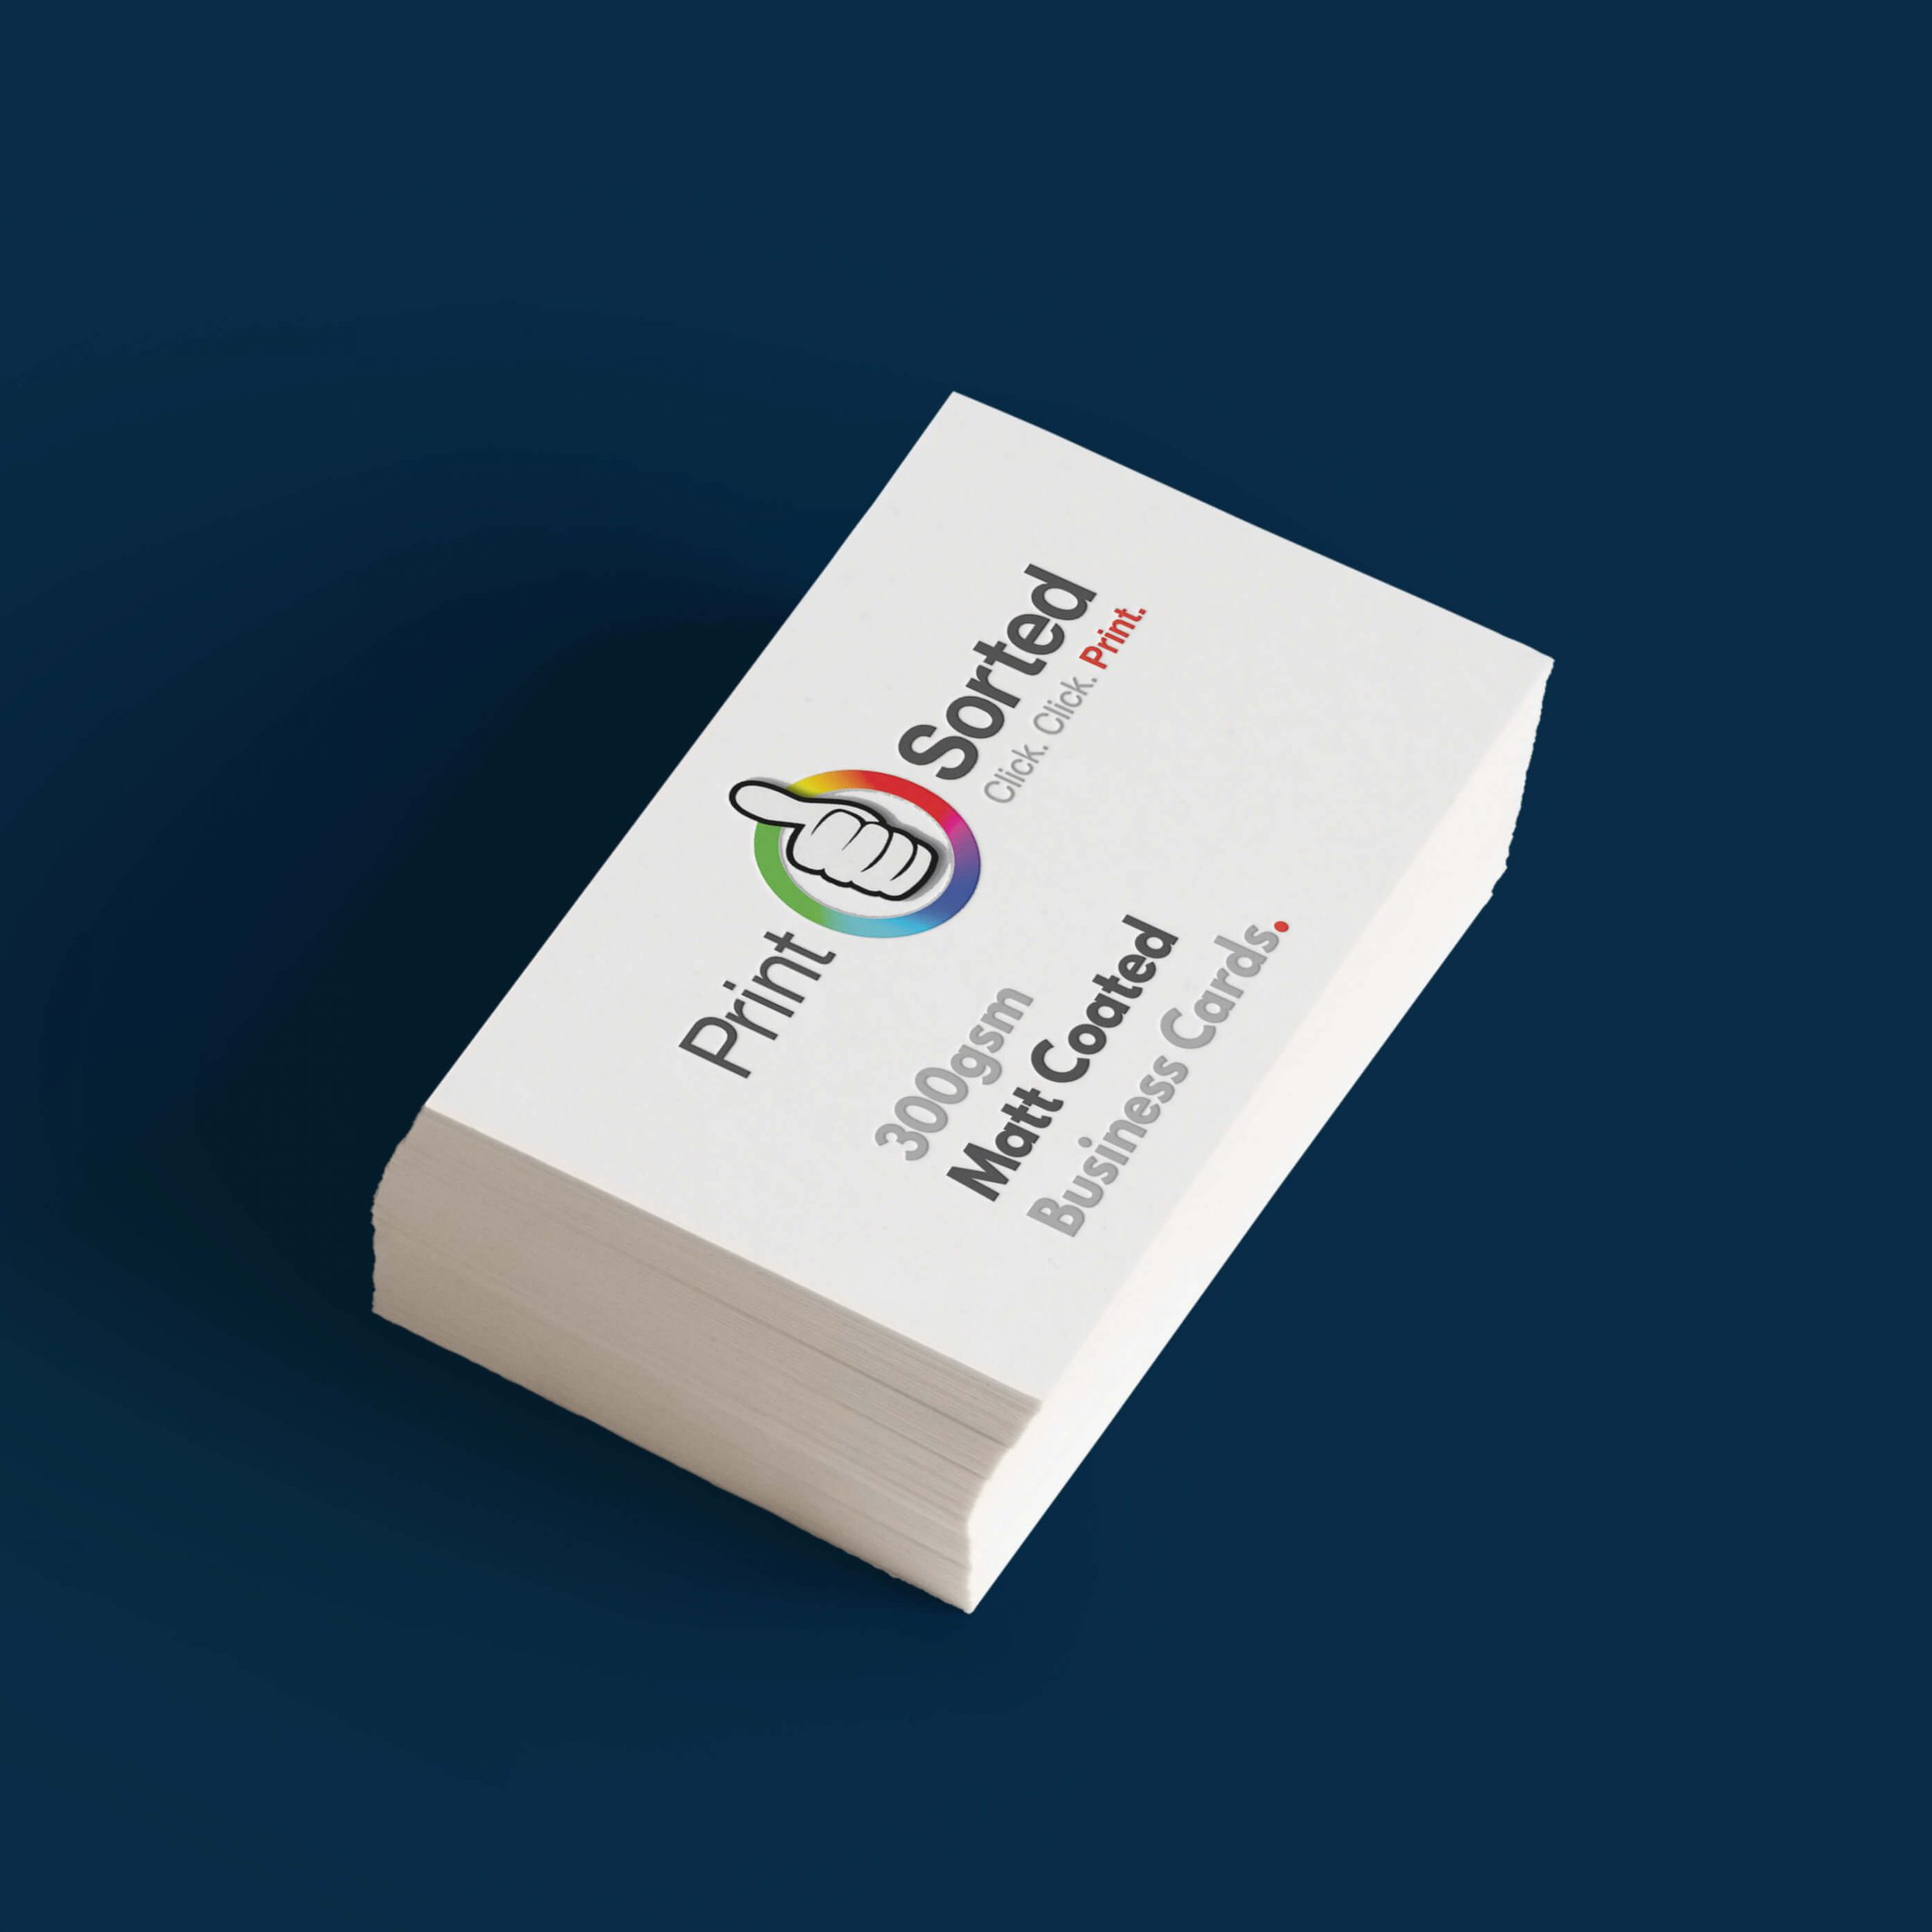 300gsm Matt Coated Business Cards by printsorted